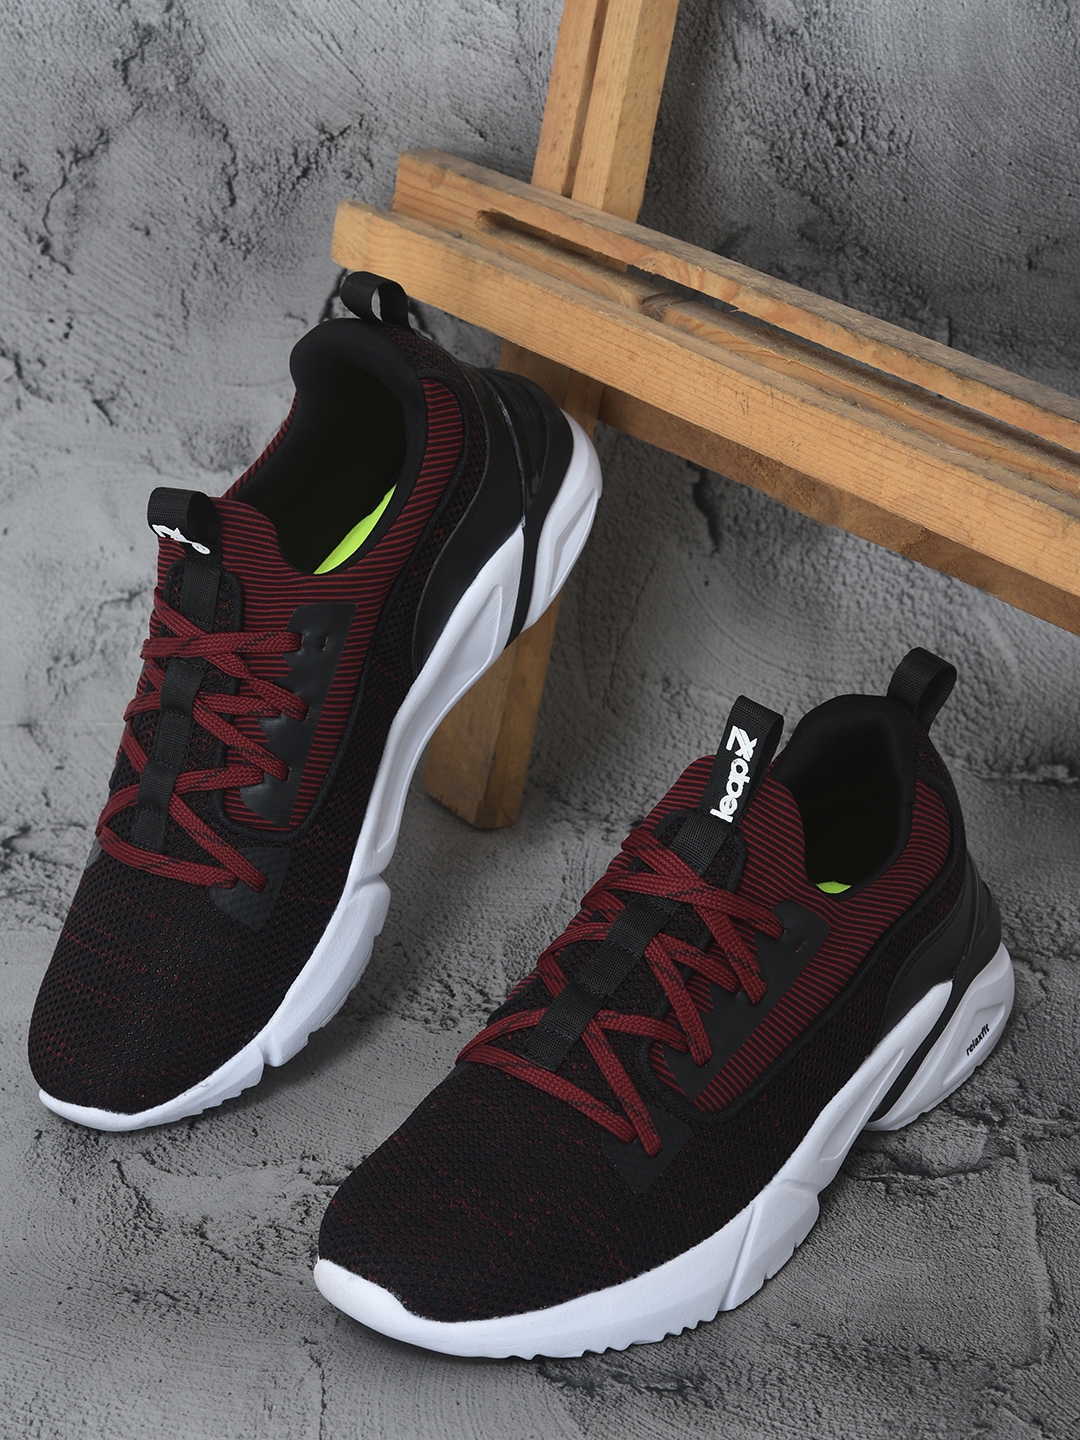 Men's Leap7X Maroon Running Shoes